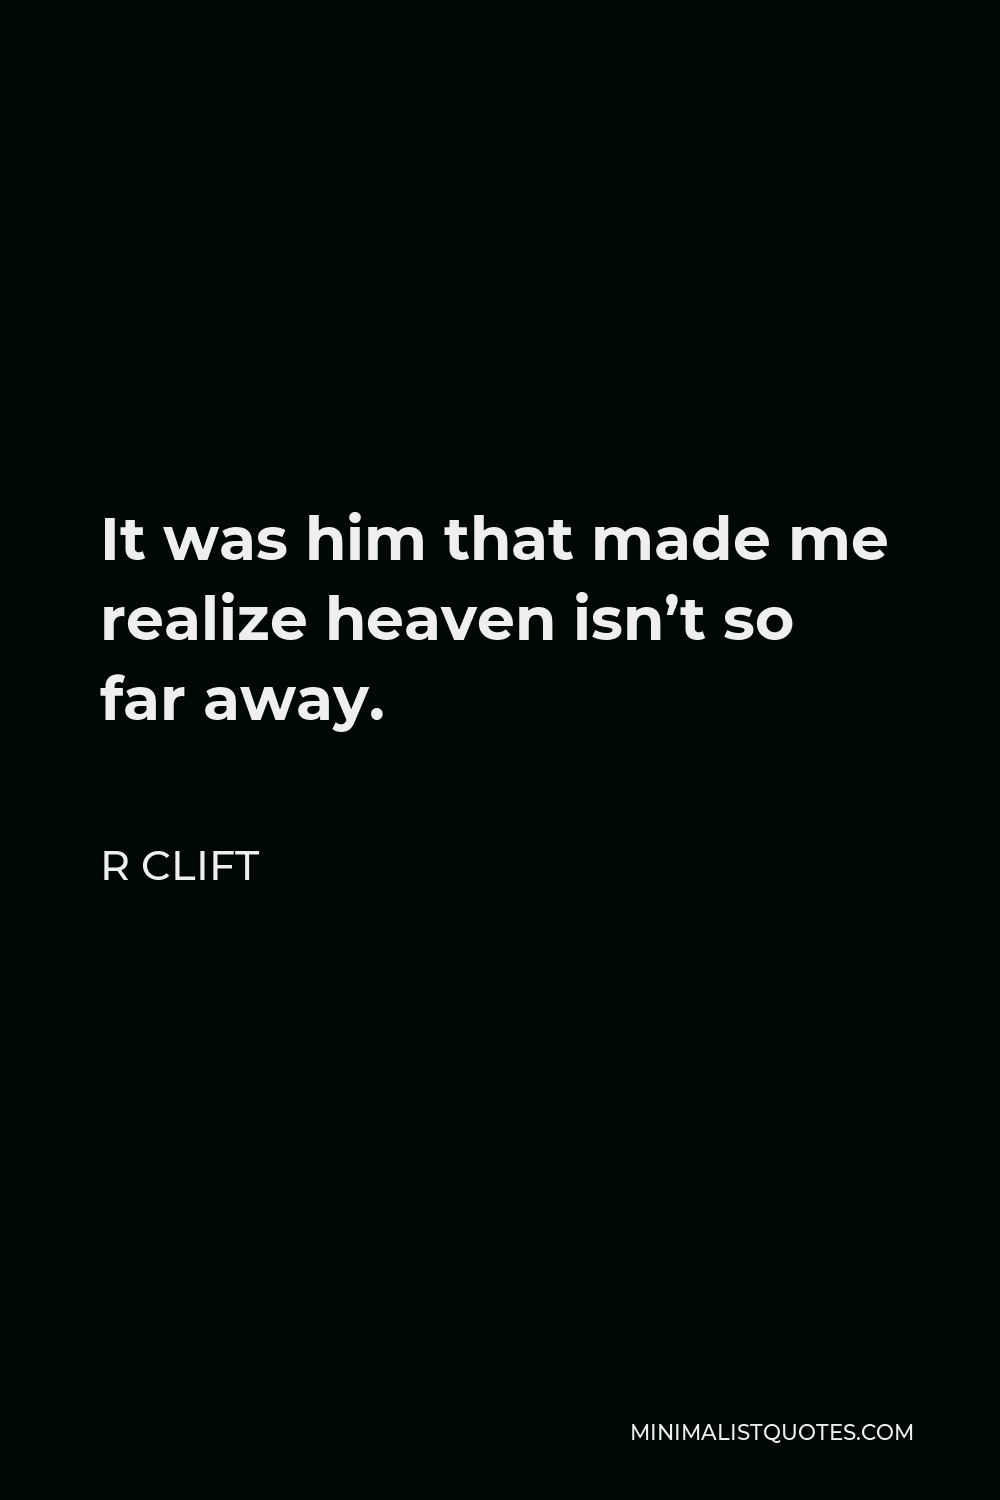 R Clift Quote - It was him that made me realize heaven isn’t so far away.